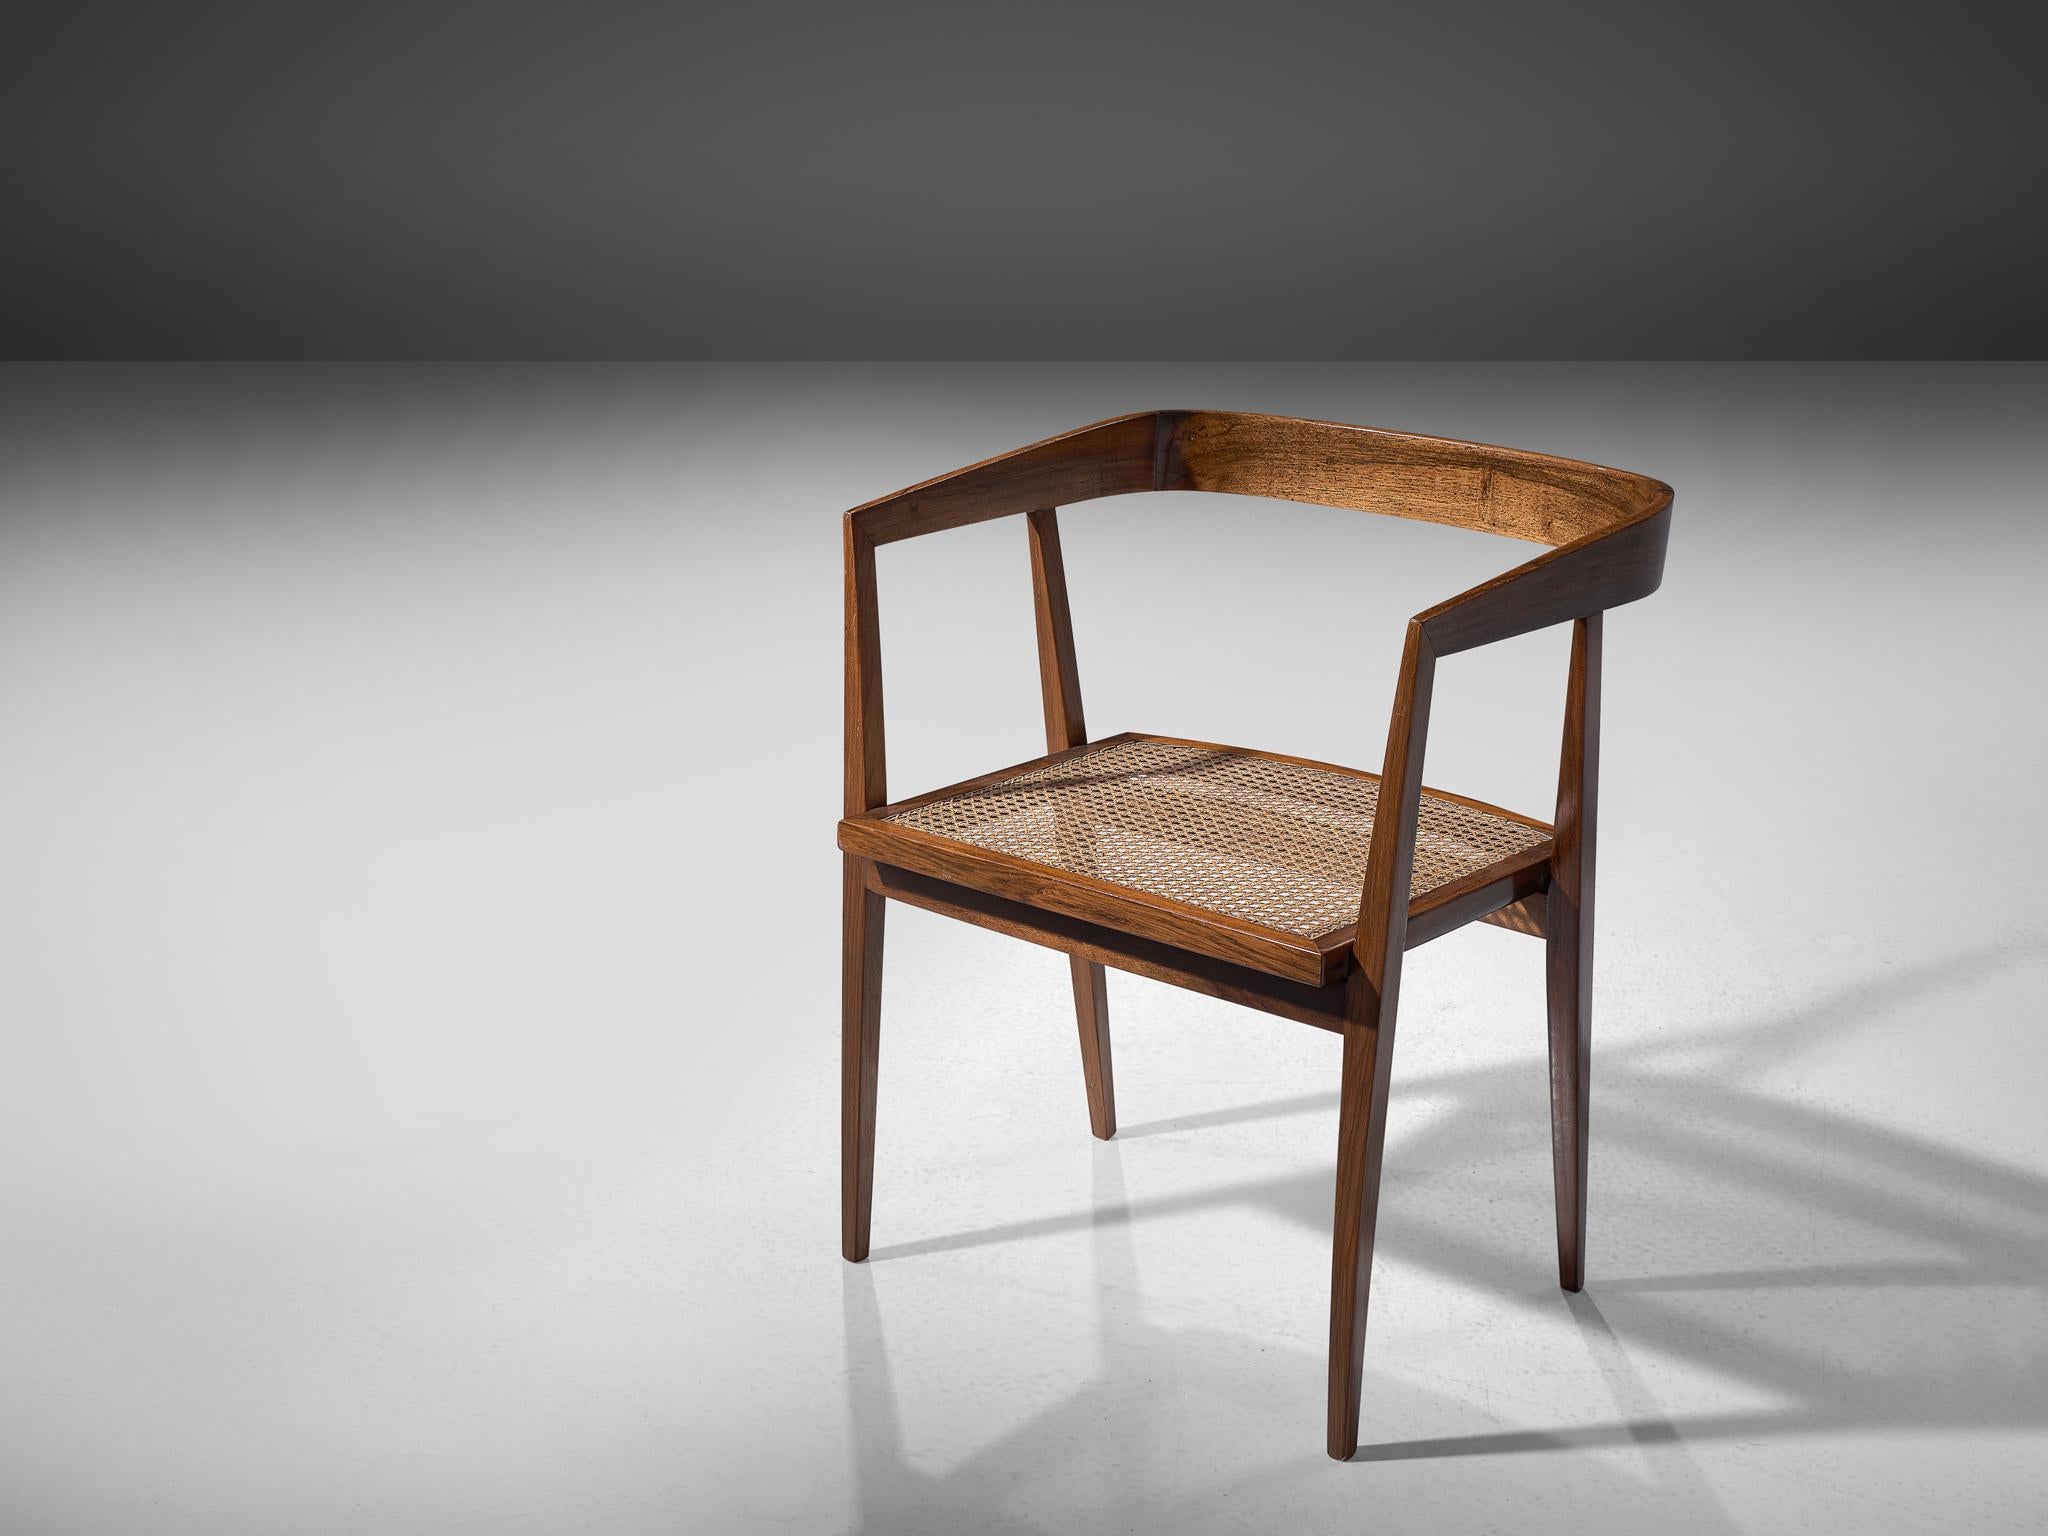 Joaquim Tenreiro, armchair, rosewood, cane, Brazil, circa 1960

An exceptional chair designed by the Brazilian master designer and woodworker Joaquim Tenreiro. The armchairs main feature is its wide, luxurious cane seat and light, open